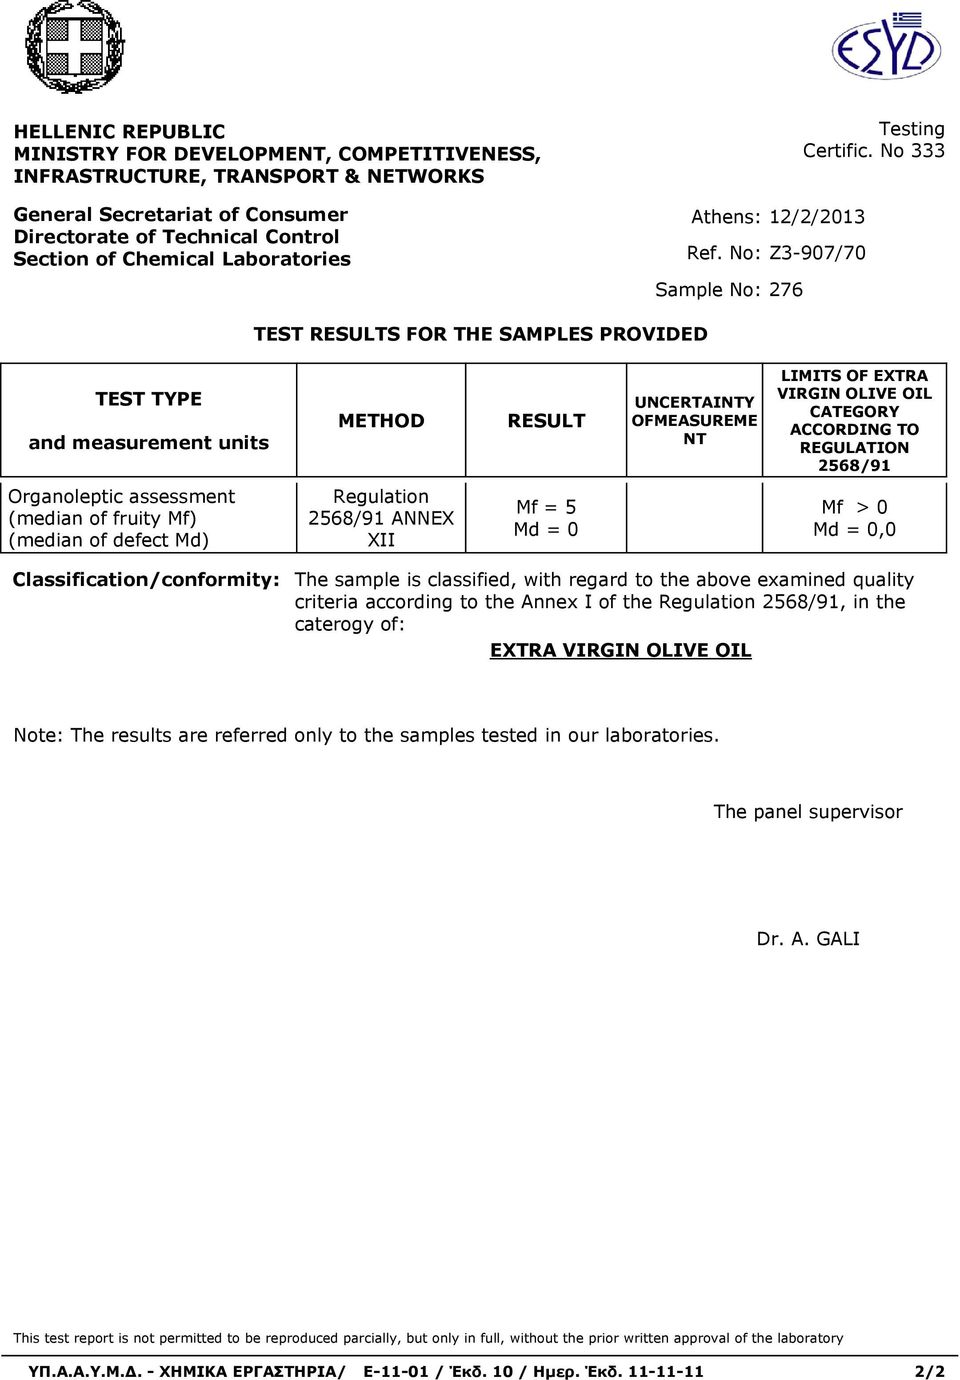 No 333 TEST RESULTS FOR THE SAMPLES PROVIDED Sample No: 276 TEST TYPE and measurement units METHOD RESULT UNCERΤAINTY OFMEASUREME NT LIMITS OF EXTRA VIRGIN OLIVE OIL CATEGORY ACCORDING TO REGULATION